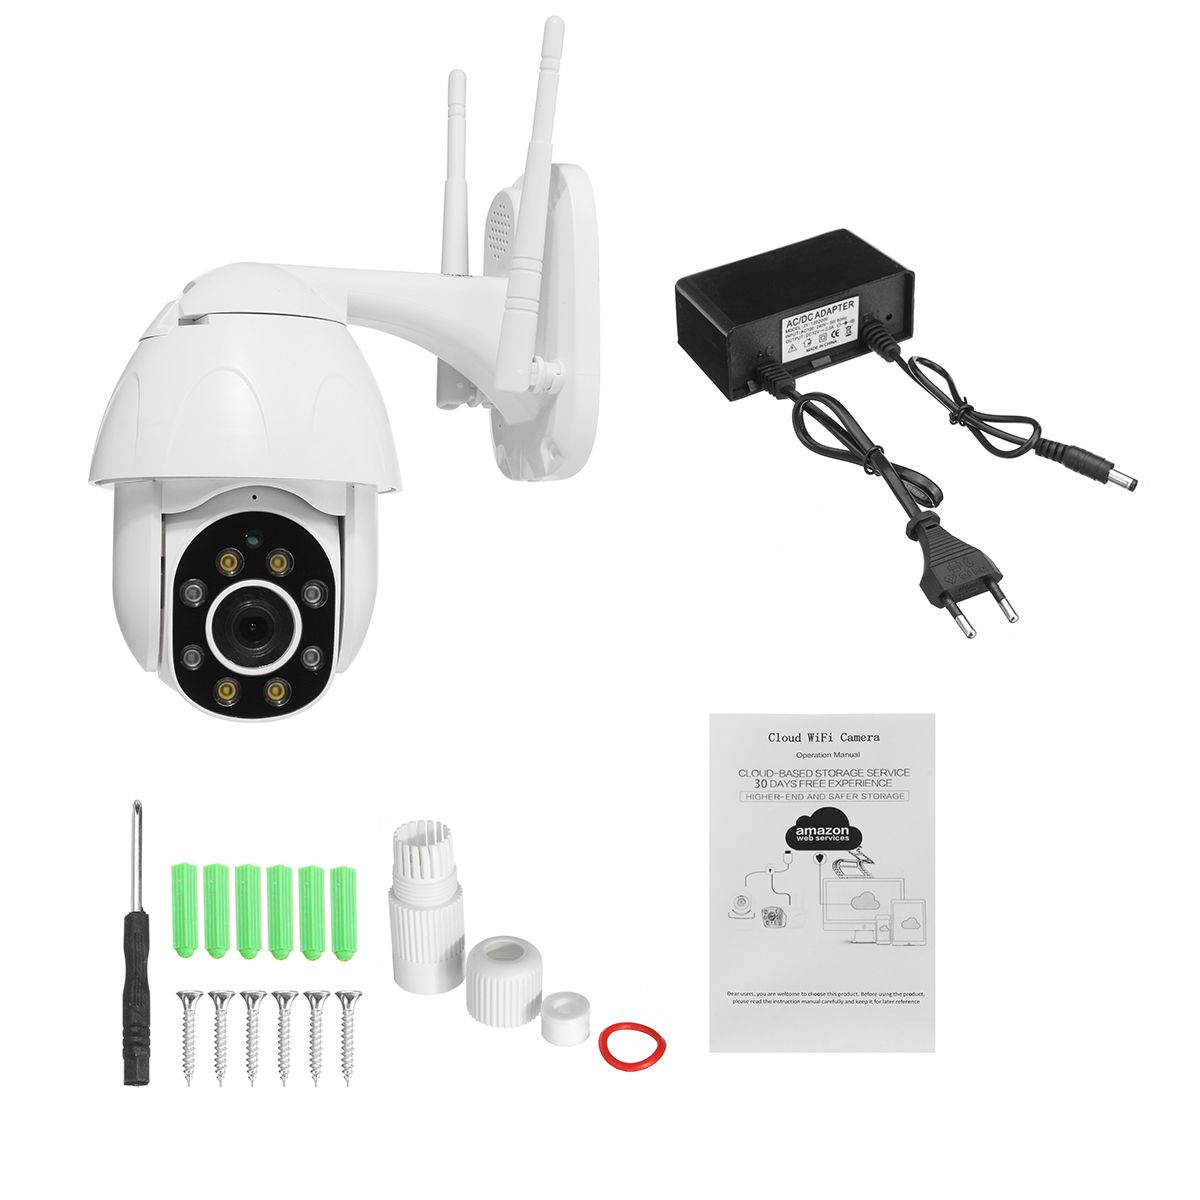 360ordm-1080P-WiFi-Outdoor-Speed-Dome-IP-Camera-Wireless-Alarm-Security-Night-Vision-1584269